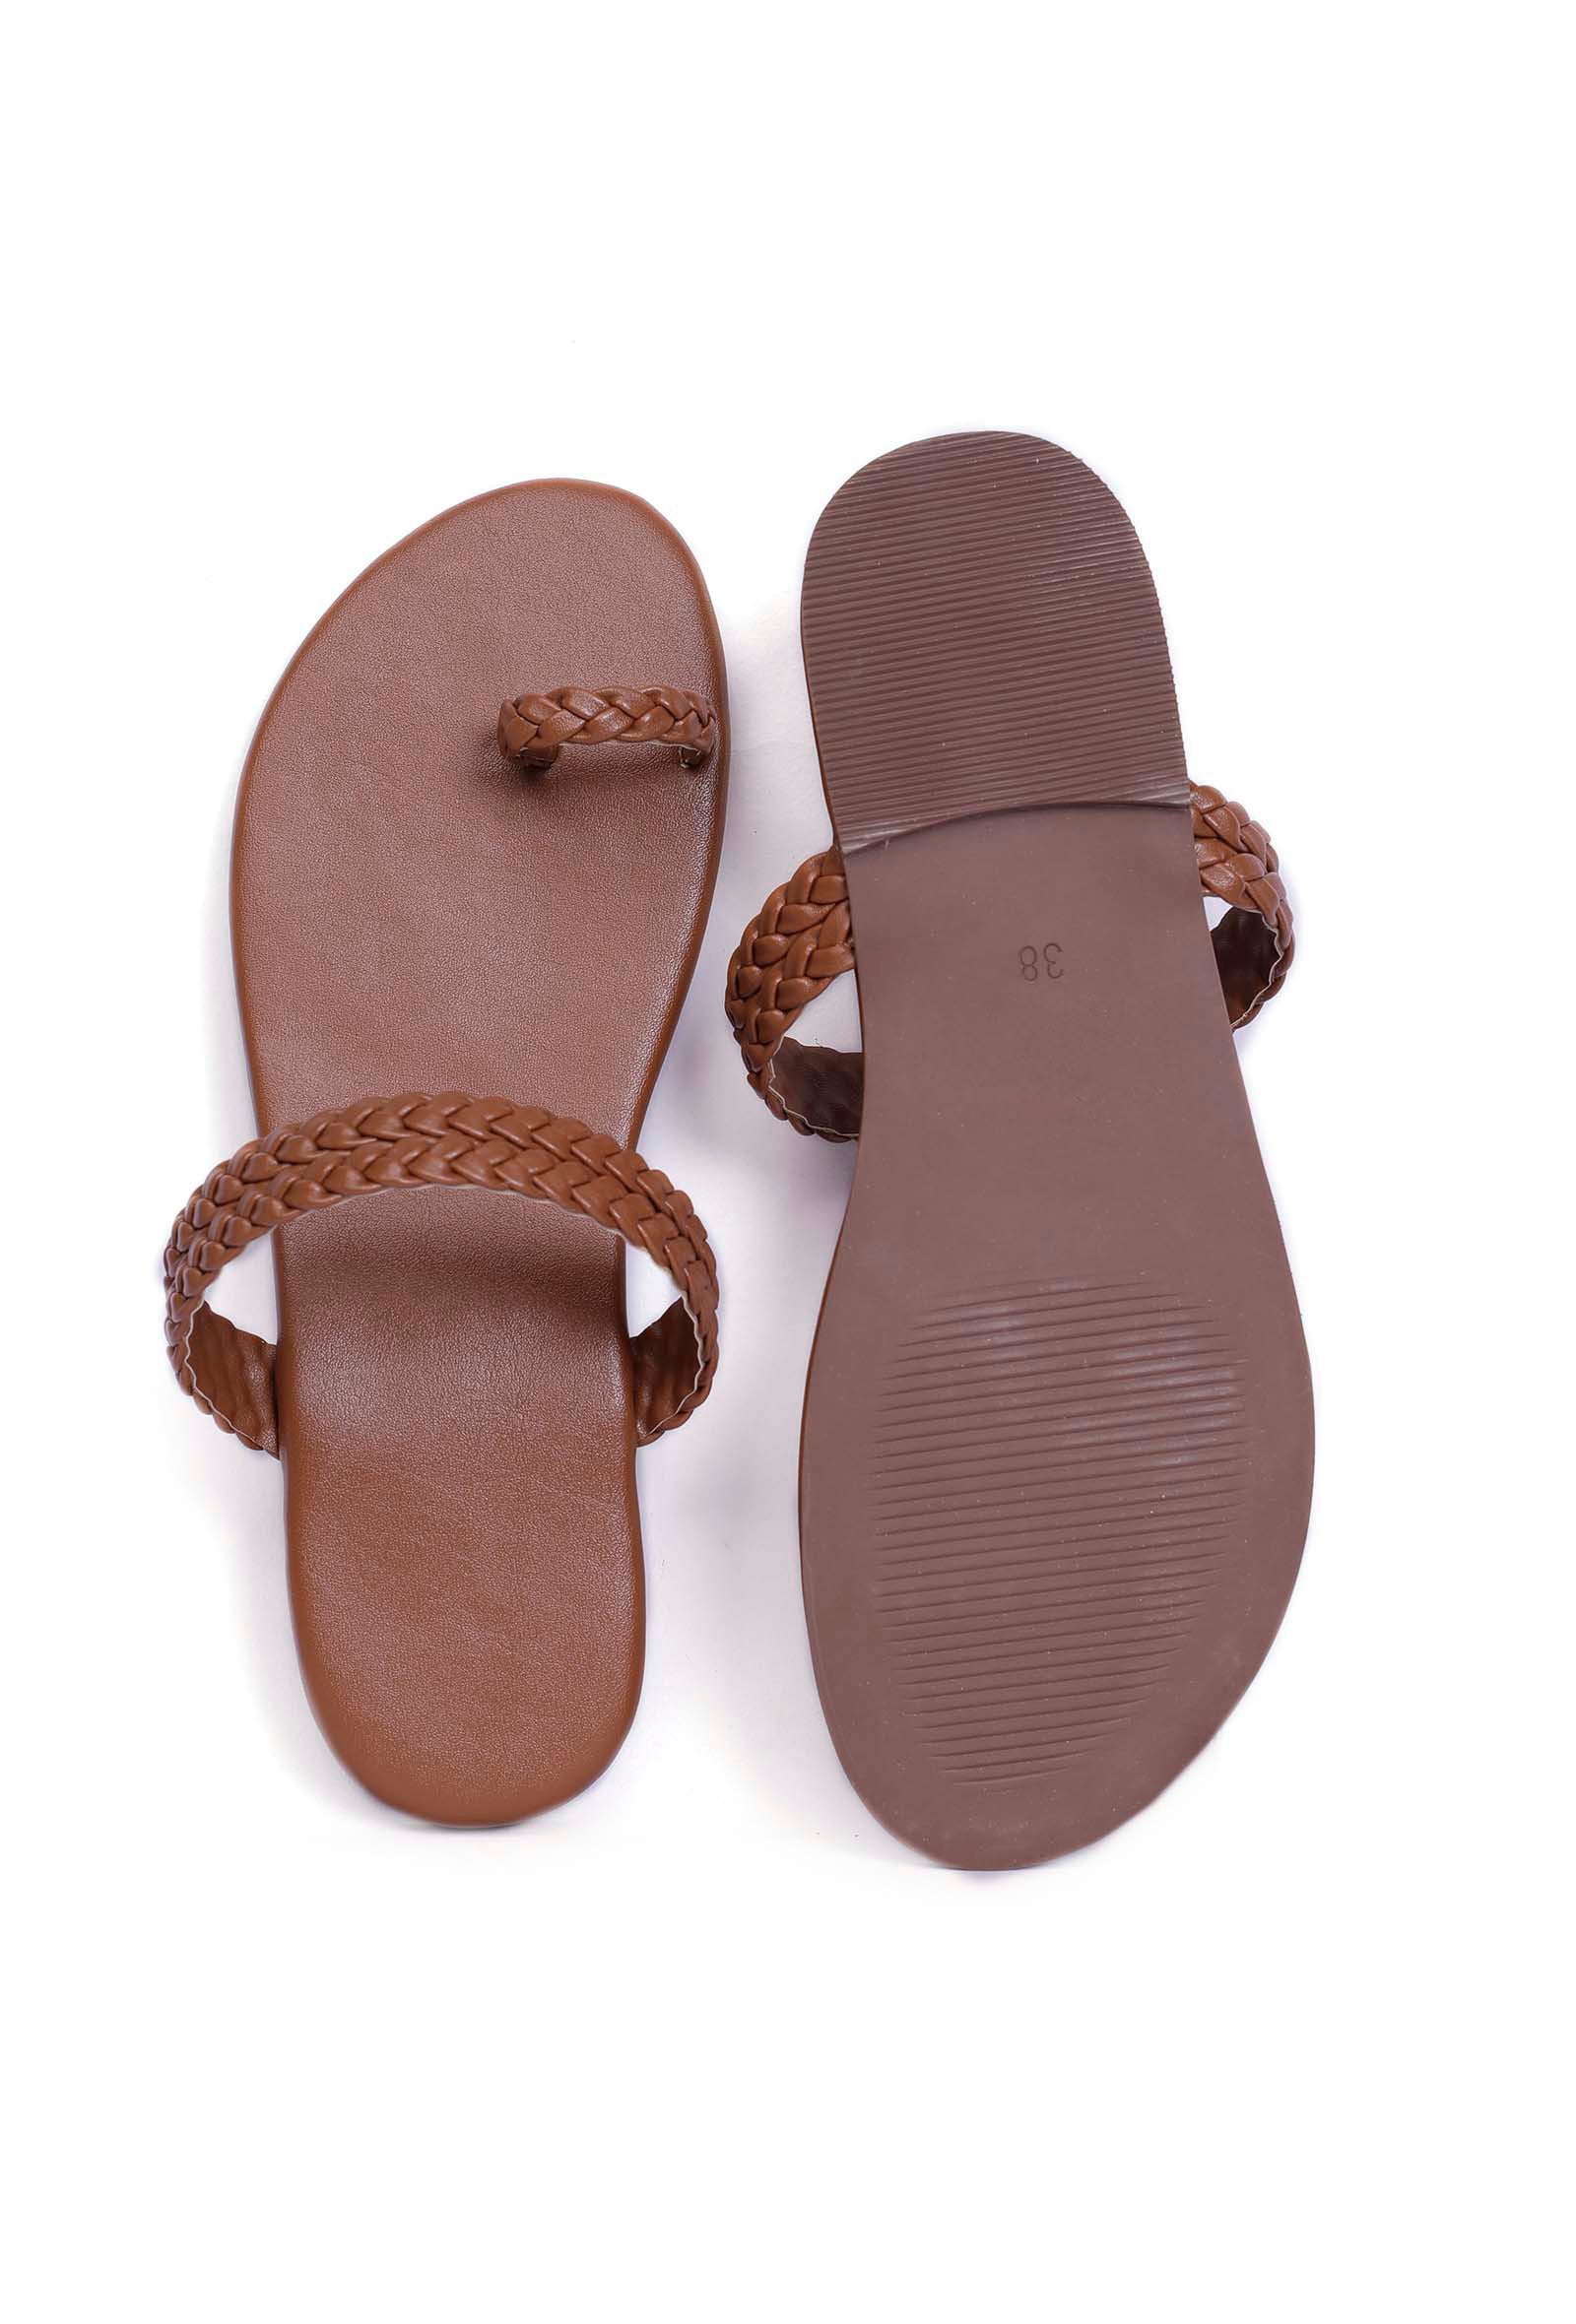 Caramel Brown Knotted Cruelty Free Leather Sandals